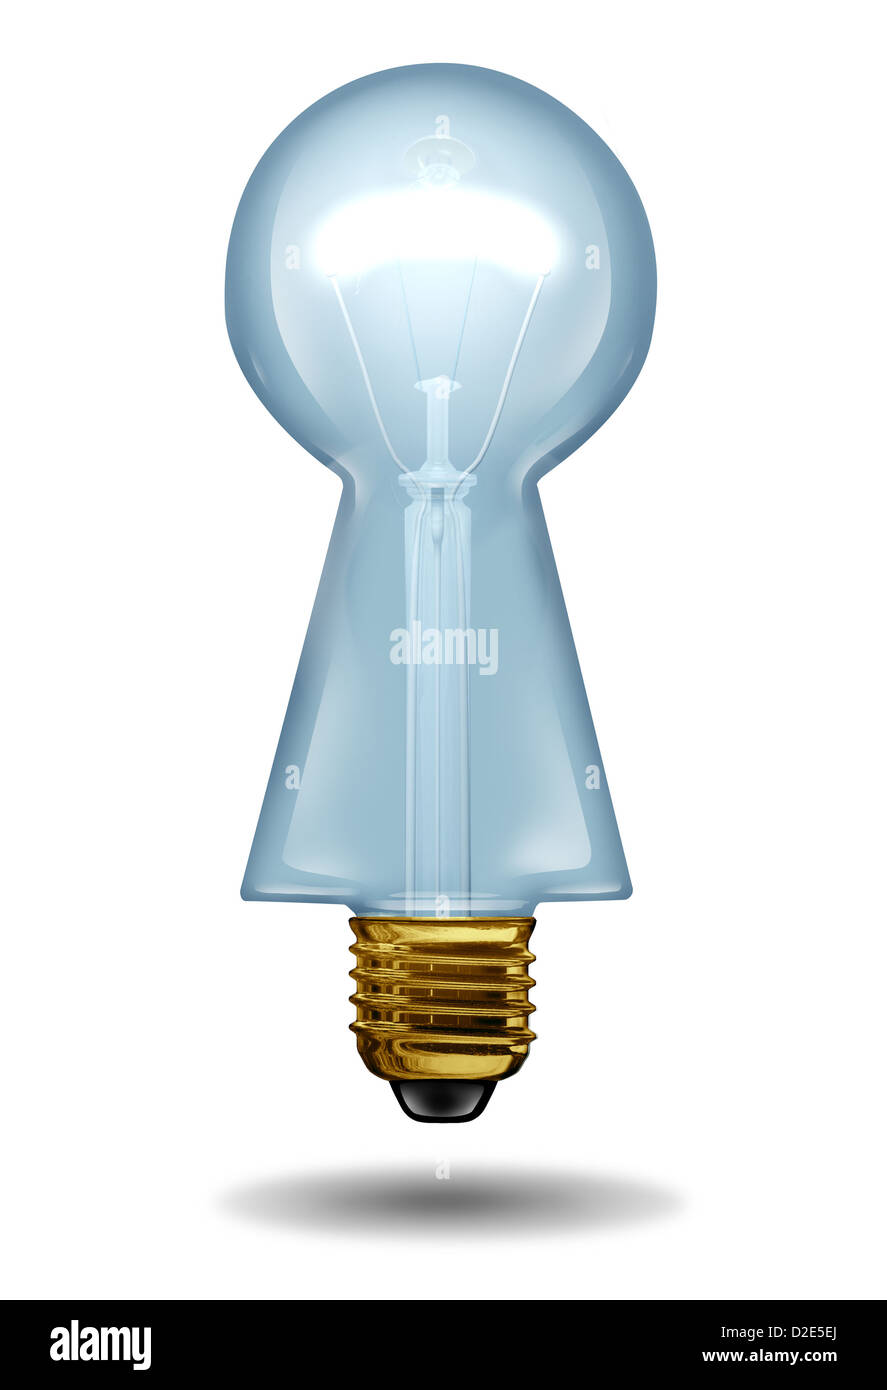 Key ideas and intelligent solutions business concept with a light bulb in the shape of a keyhole on a white background as a concept of creative solutions and expert guidance. Stock Photo